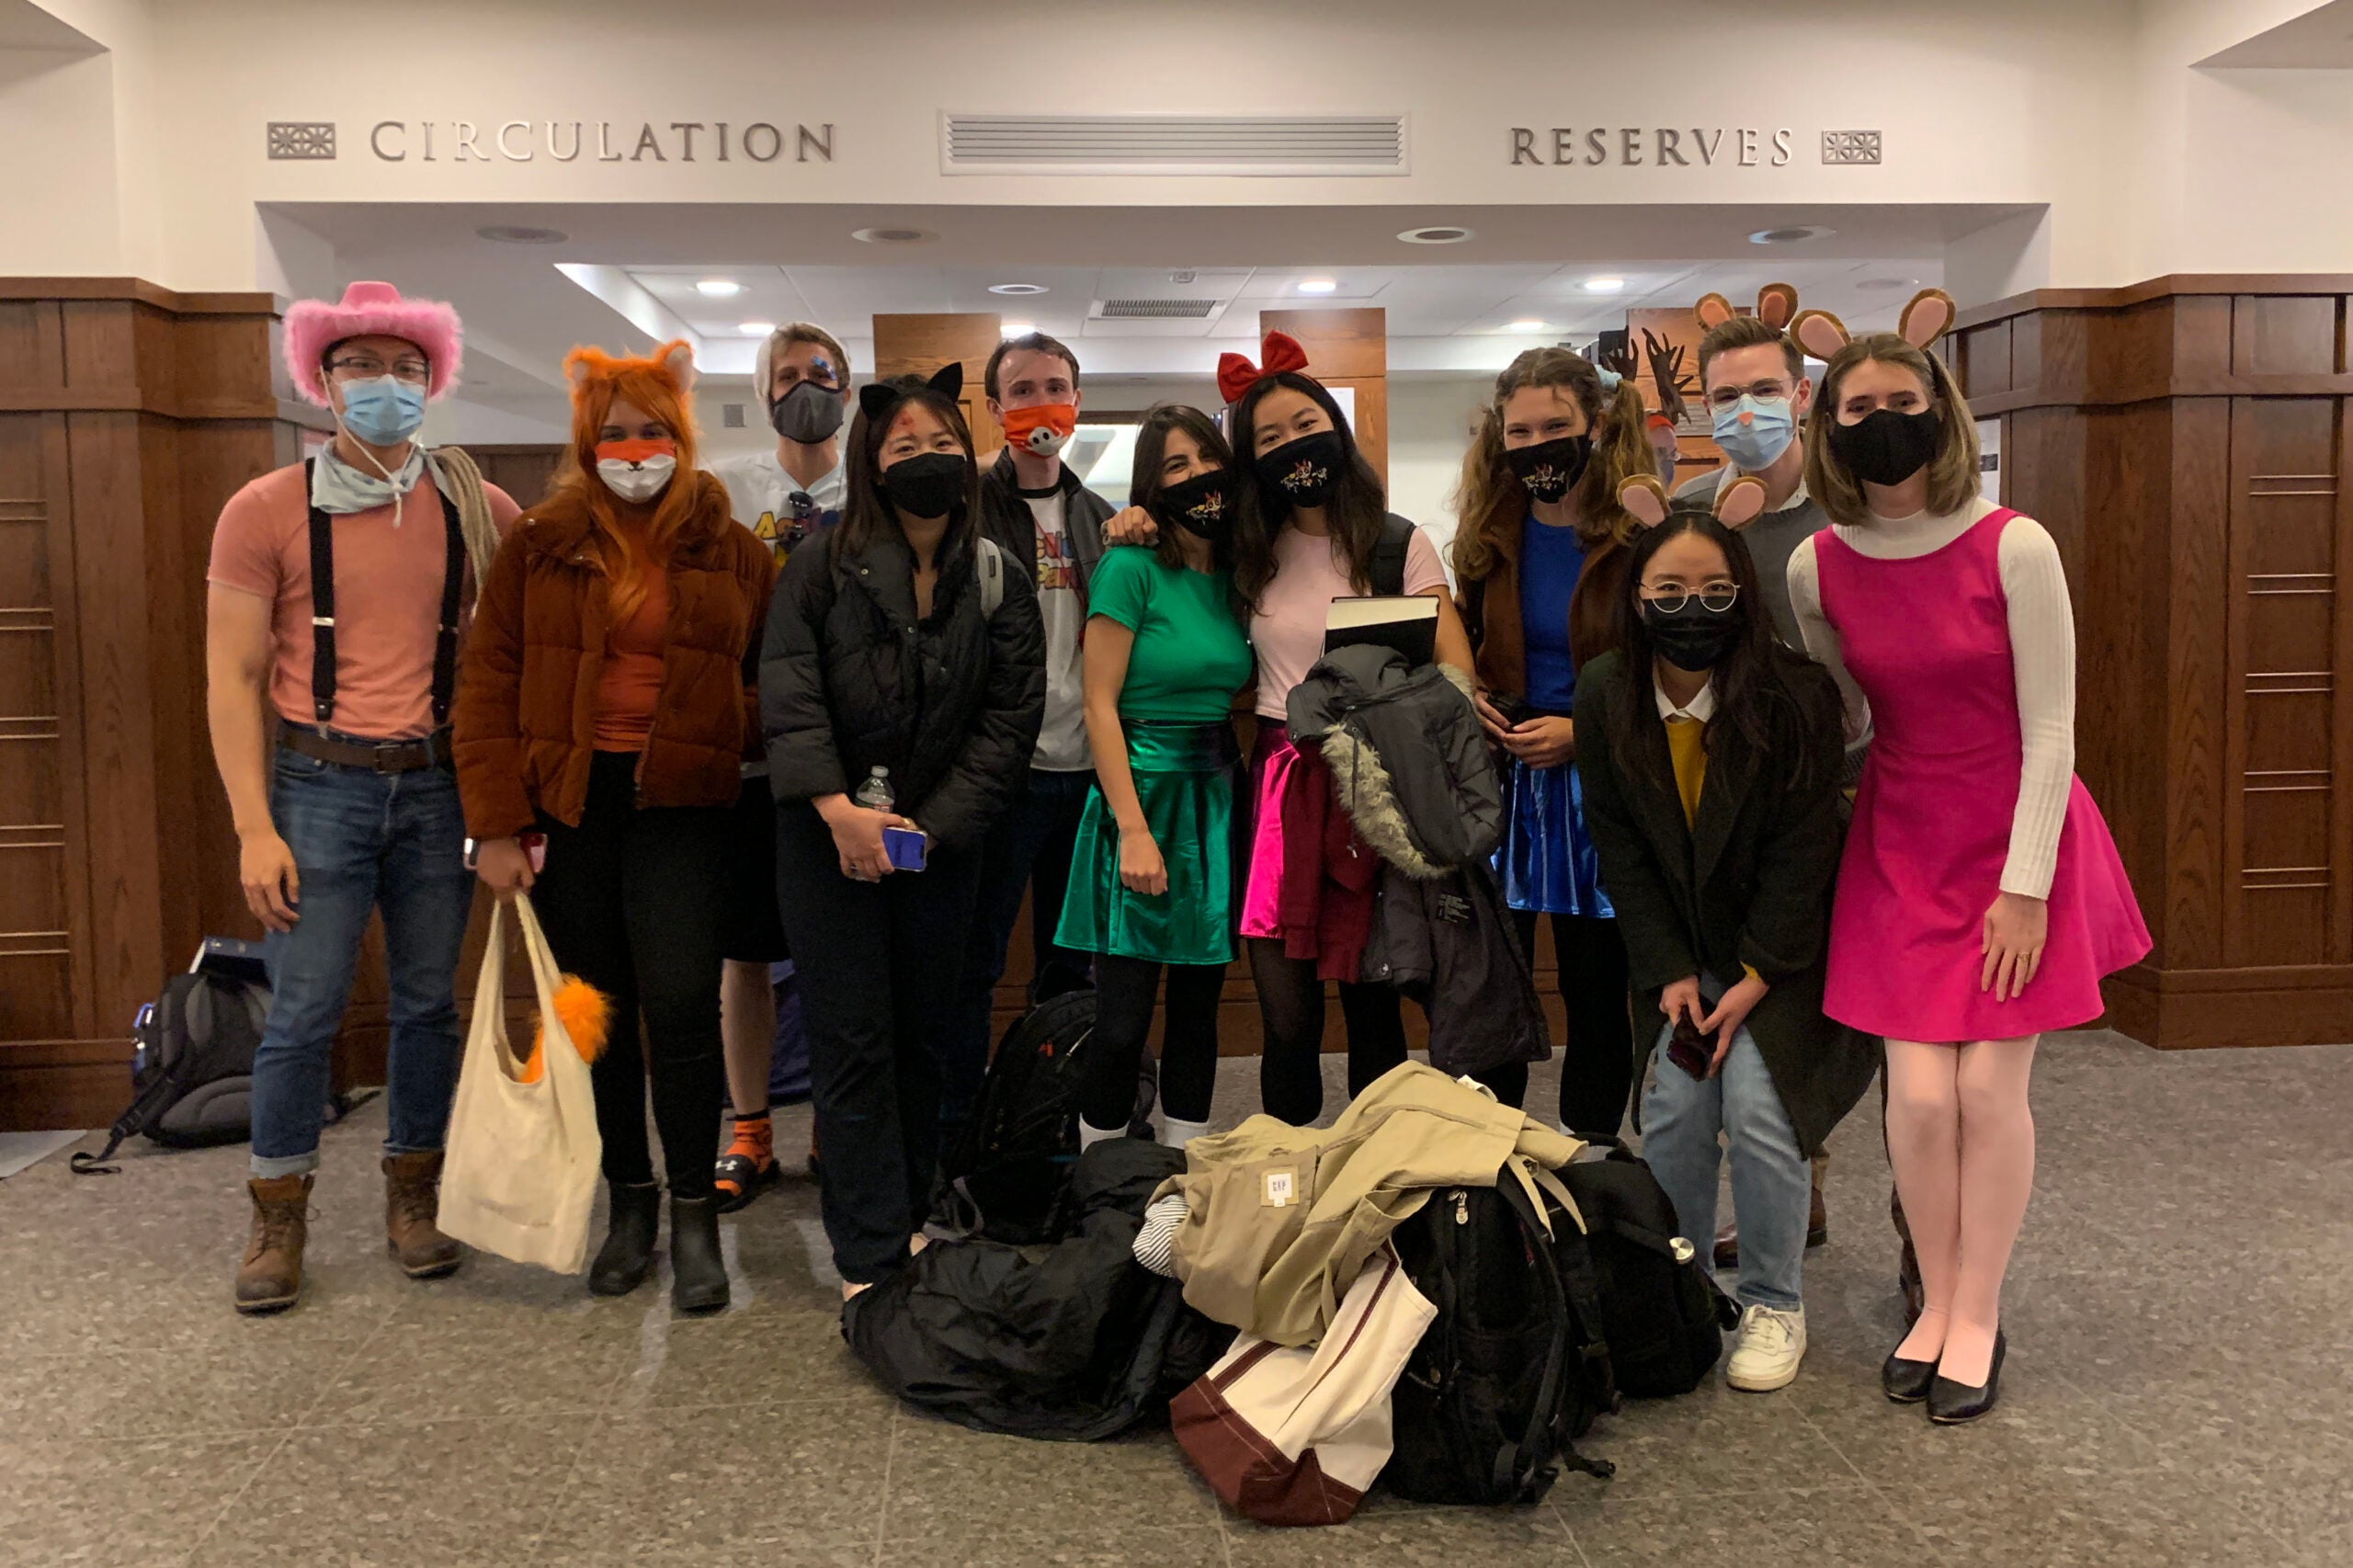 Group of students wearing face masks and wearing Halloween costumes posing for the camera.